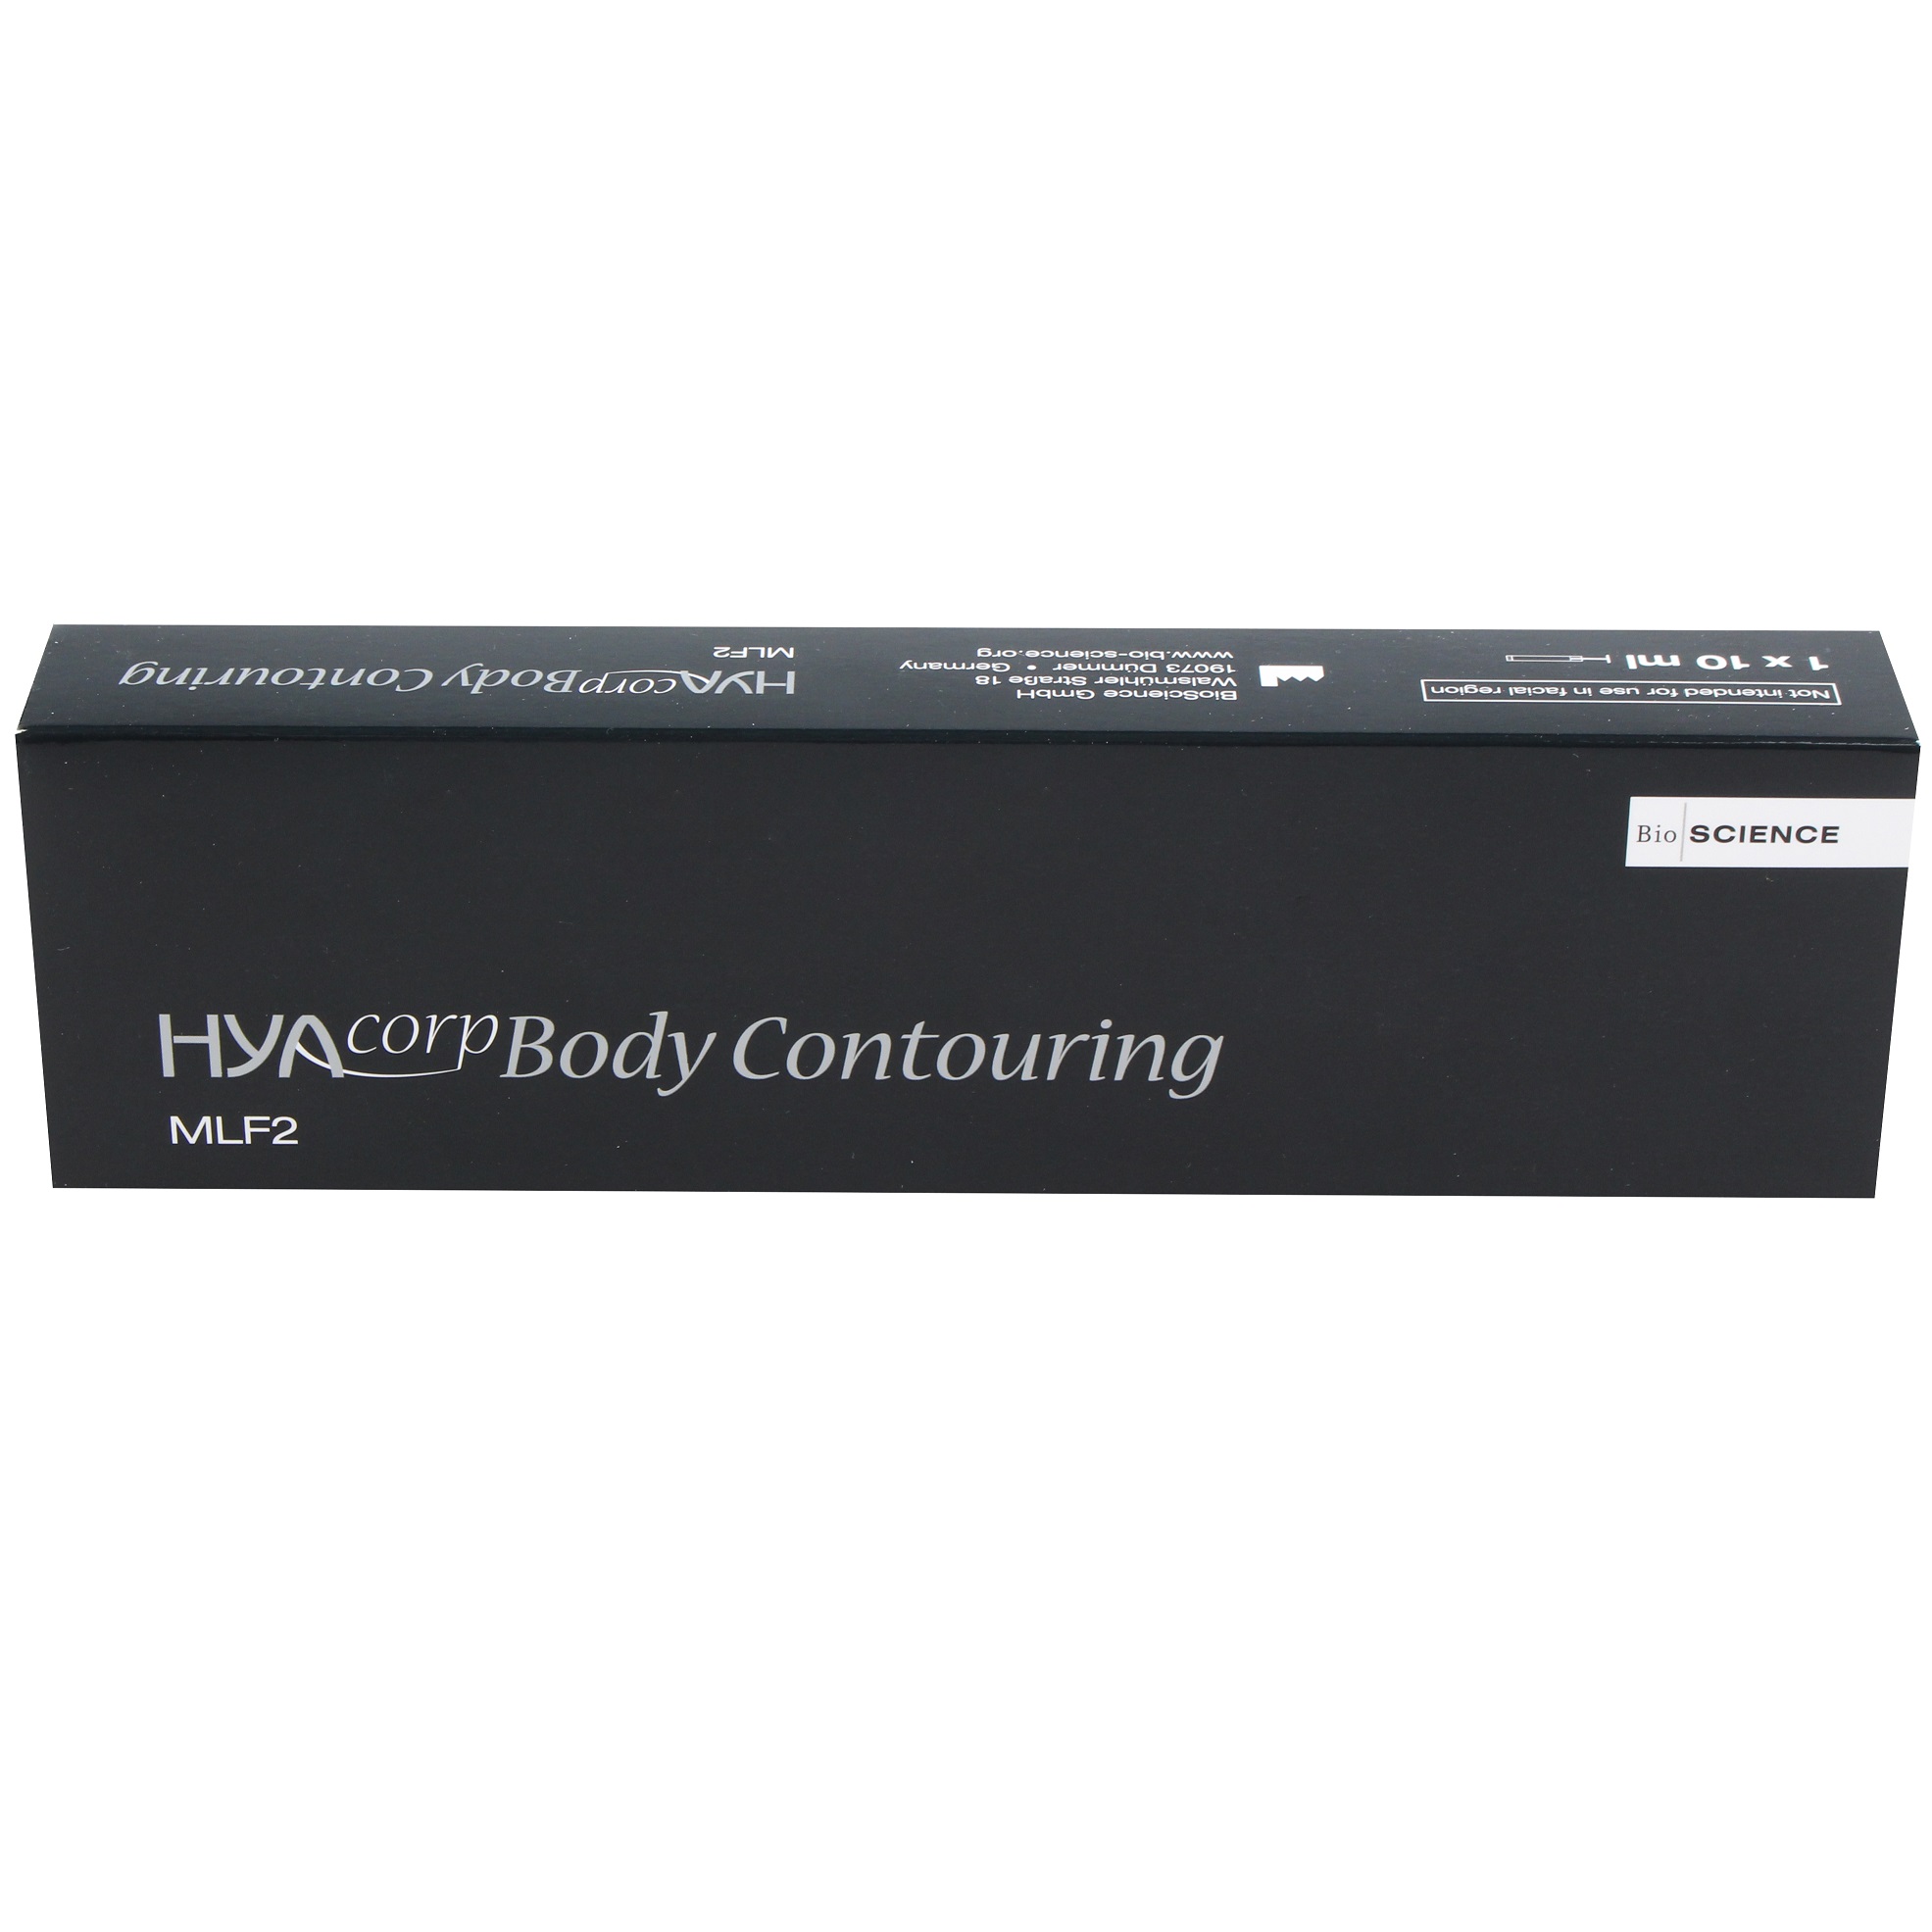 HYACORP MLF2 BODY CONTOURING front